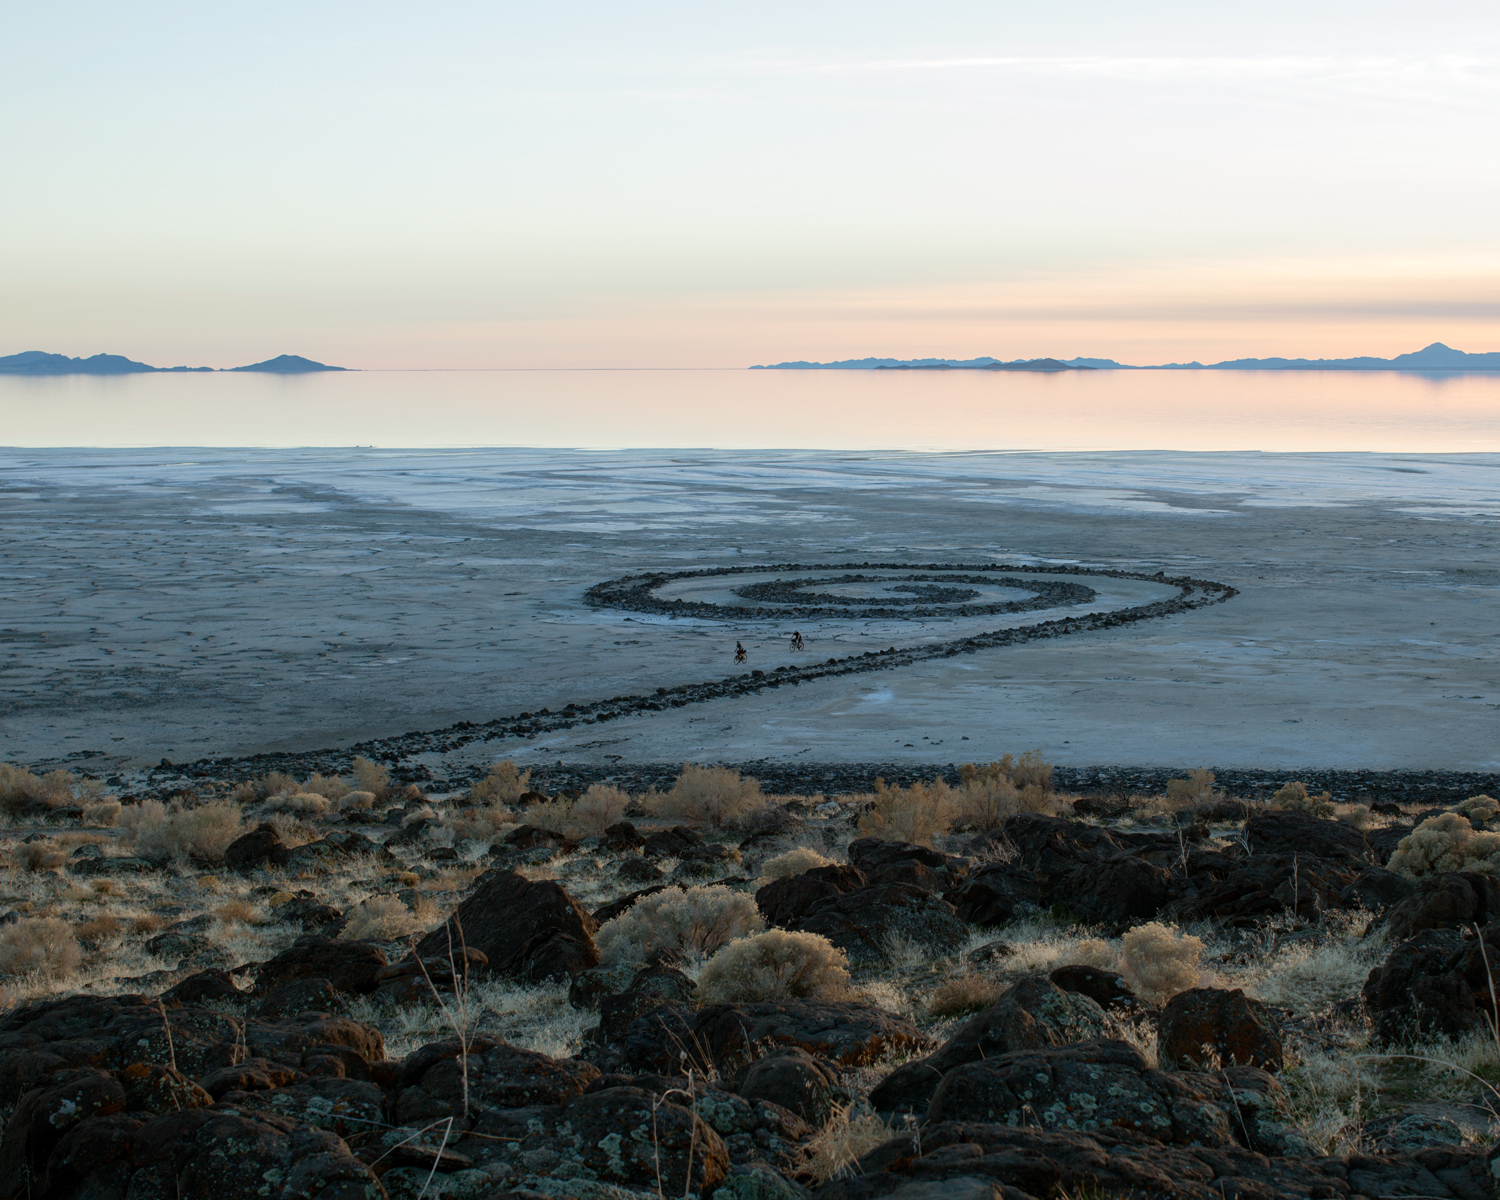 Todd Stewart, Bicyclists, at Smithson's Spiral Jetty, Utah, 2014, archival inkjet print, 16x20 inches, Courtesy of the artist